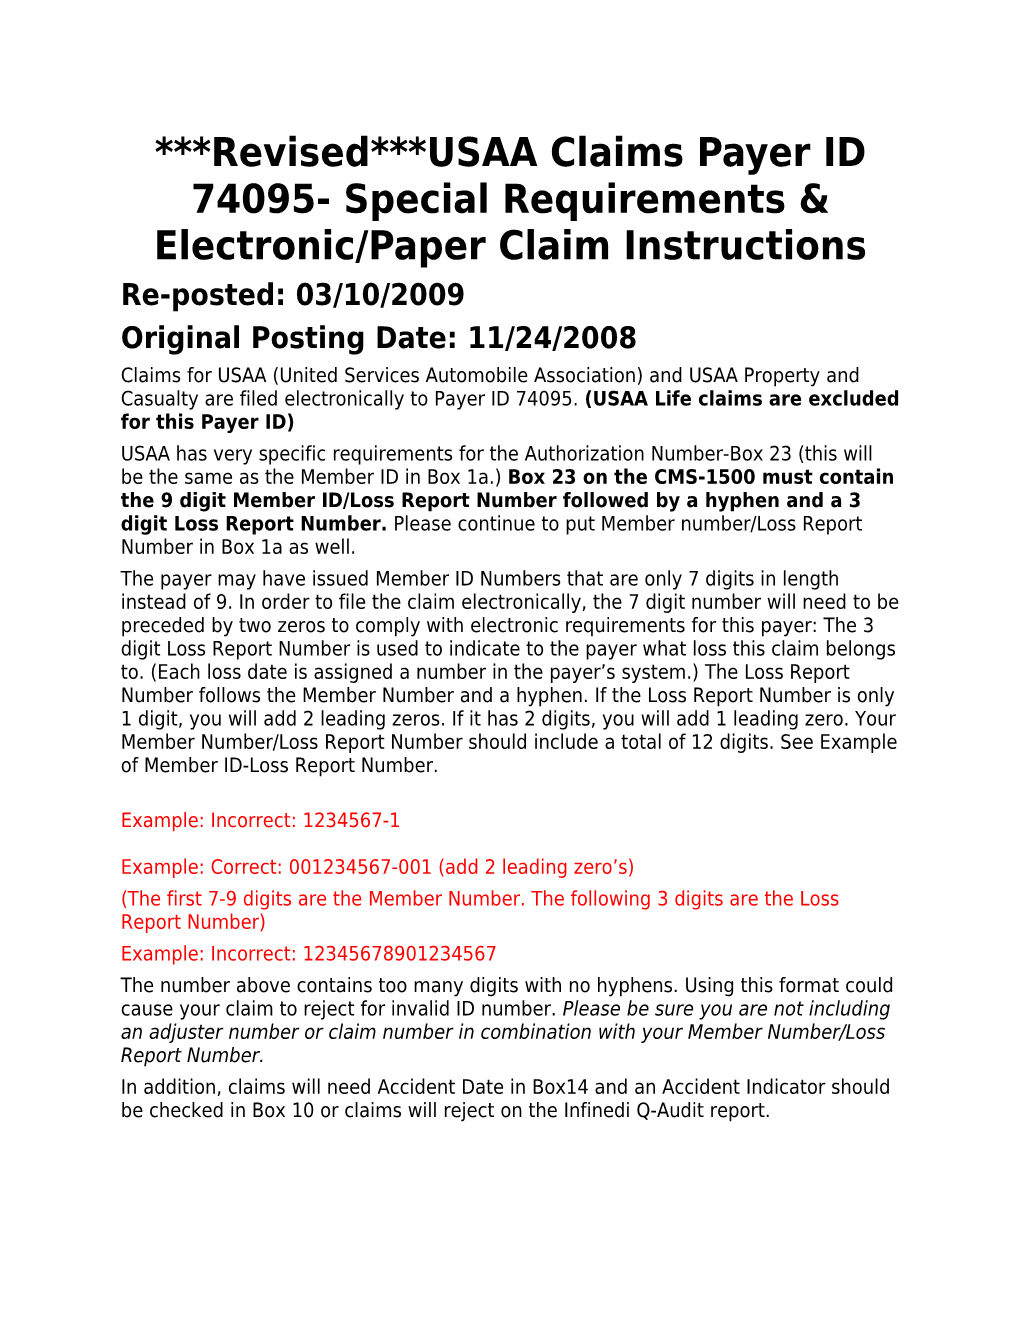 Revised USAA Claims Payer ID 74095- Special Requirements & Electronic/Paper Claim Instructions